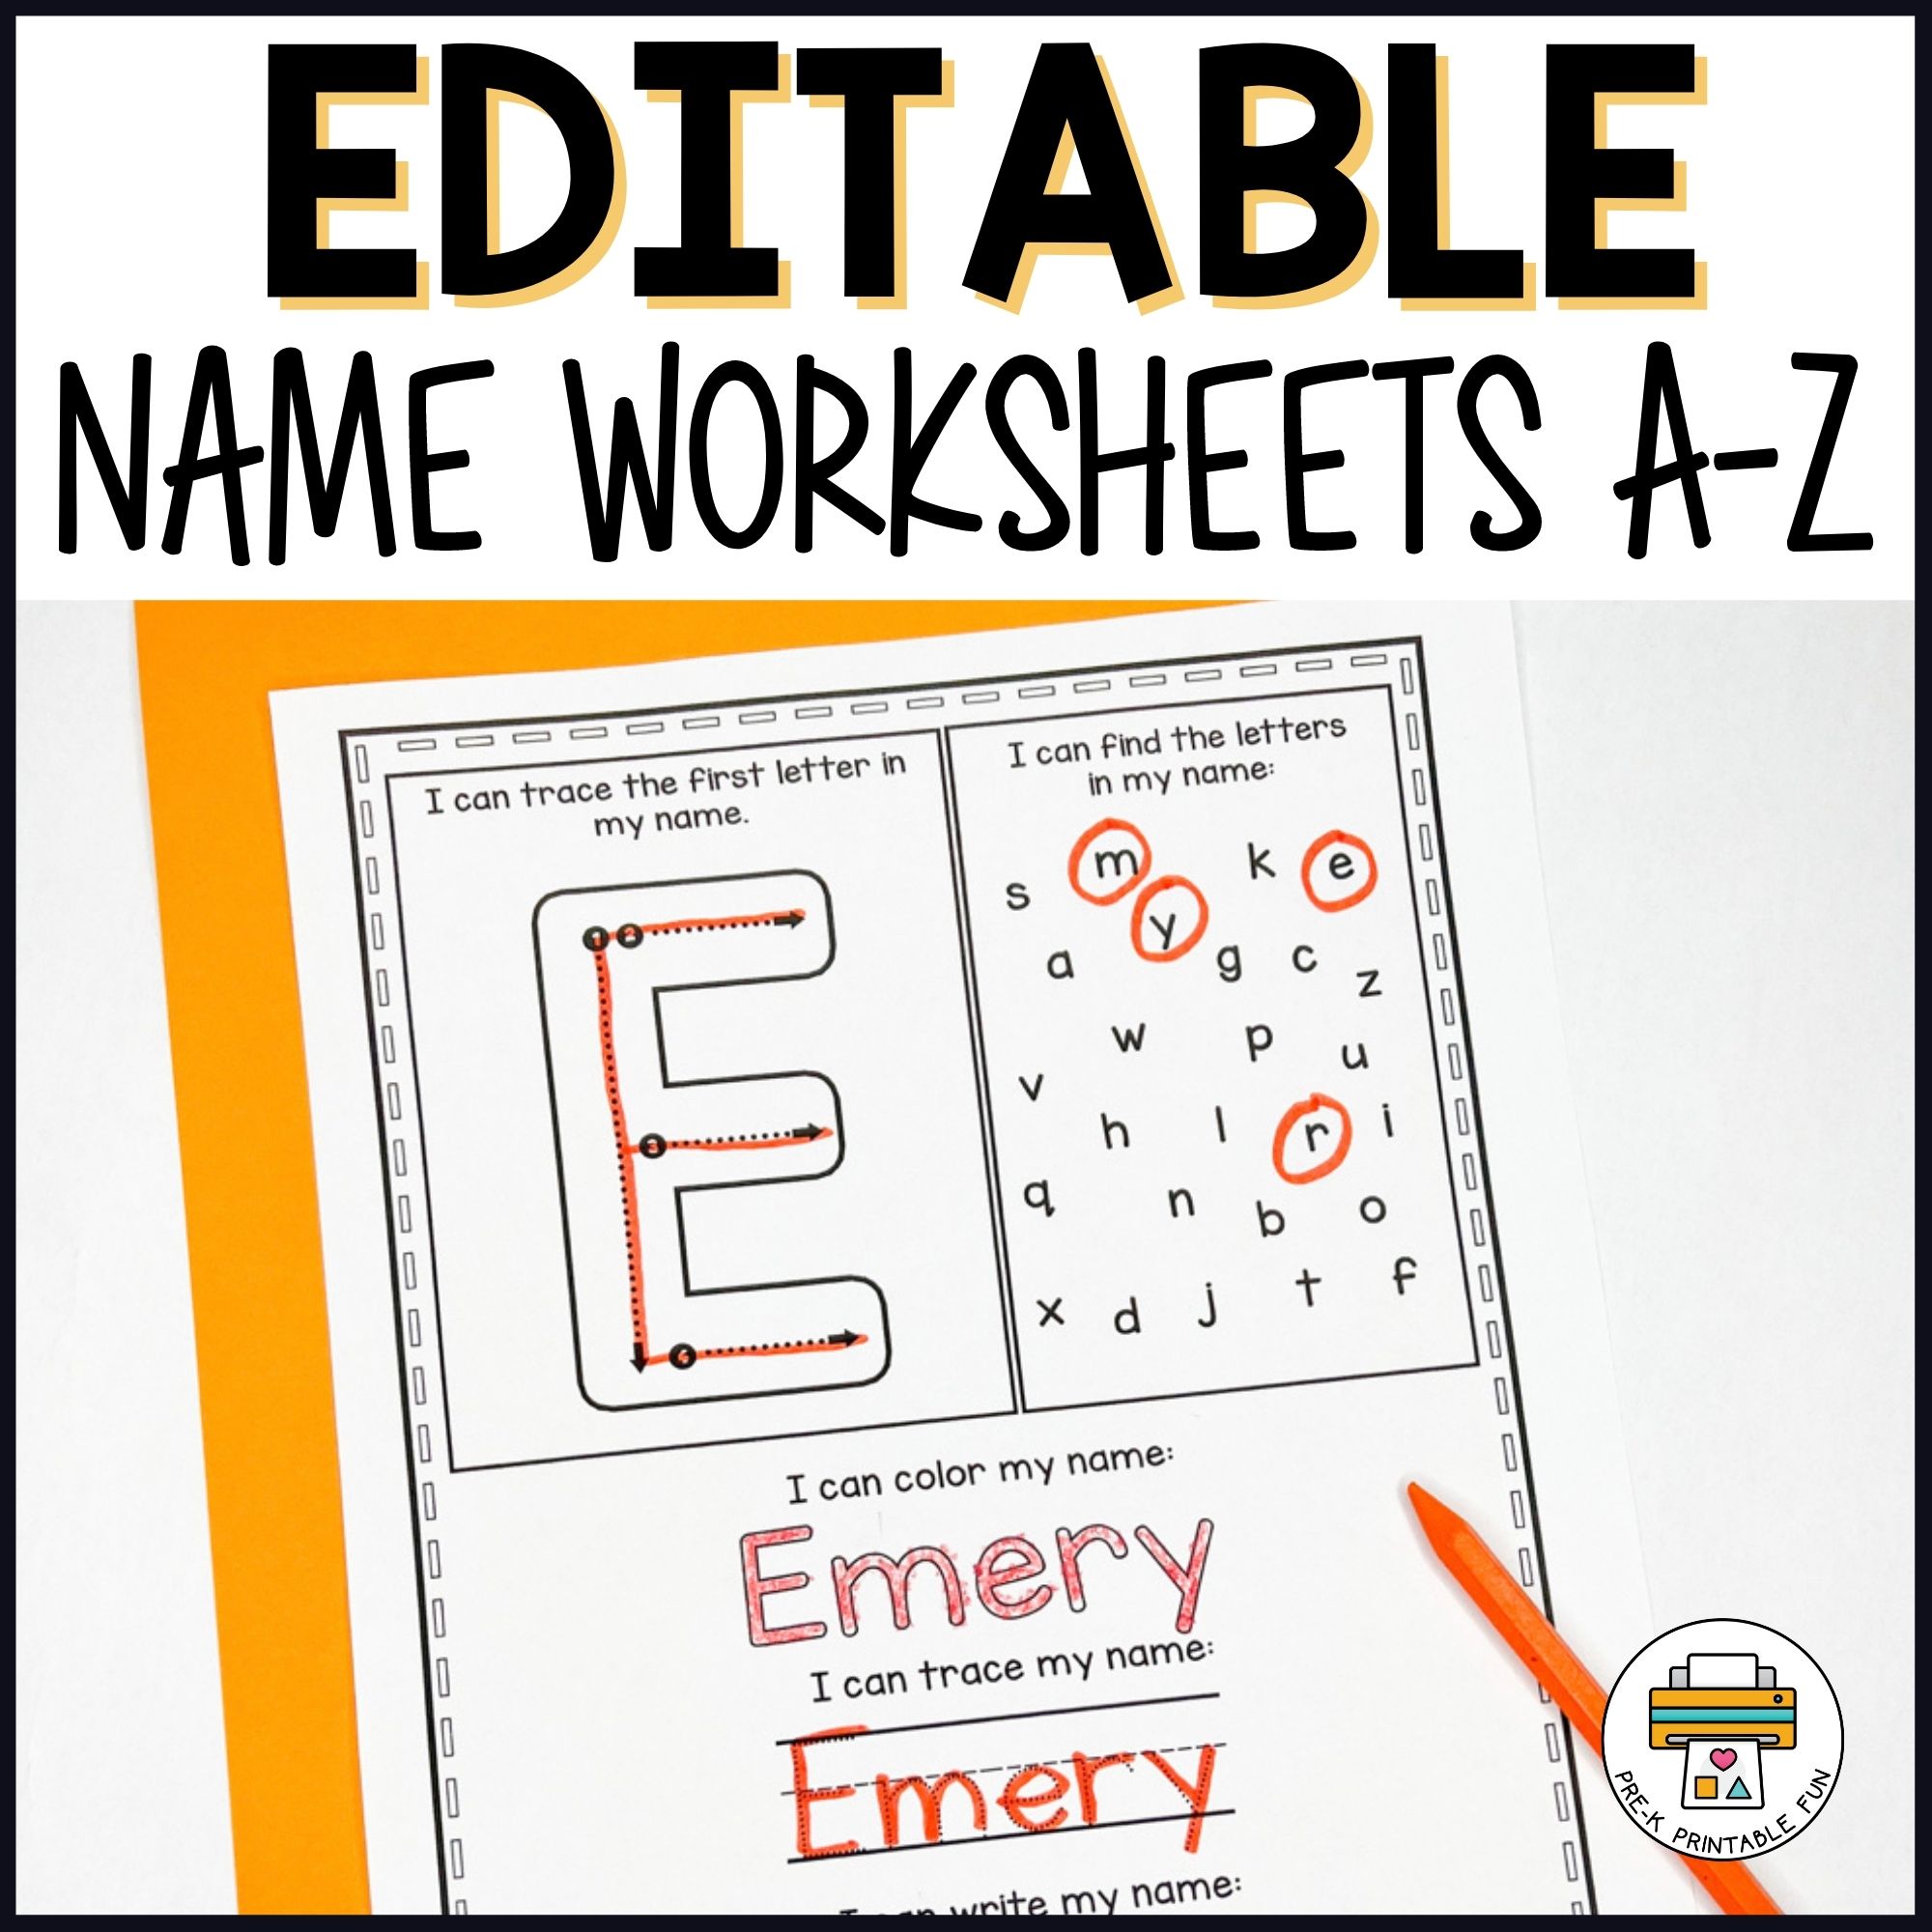 editable name worksheets a to z